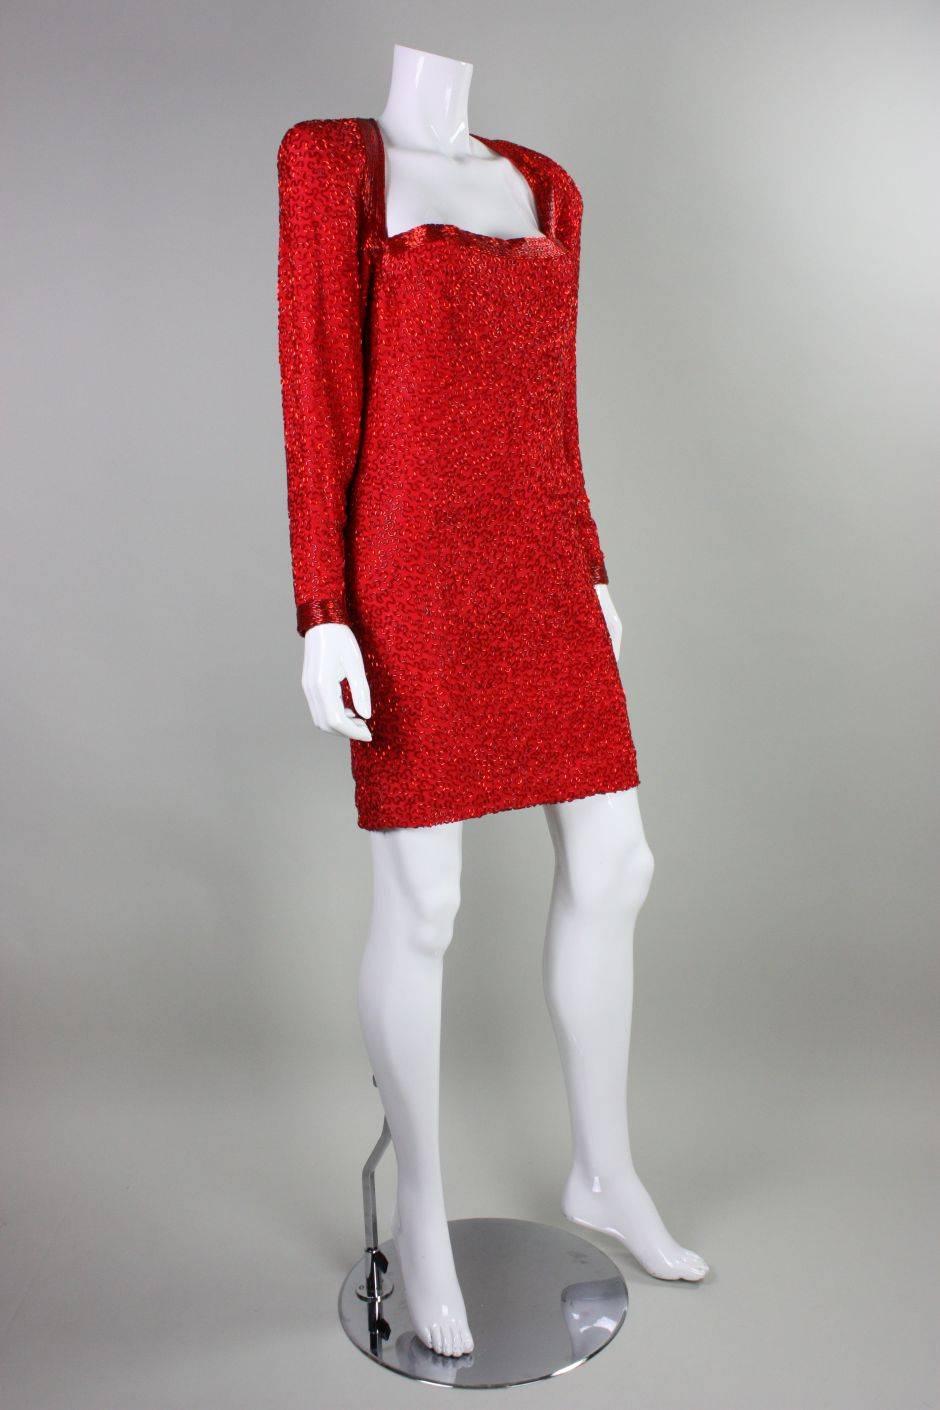 Vintage party dress from Stephen Yurich dates to the 1980's and is made of red silk that is embellished allover with red bugle beads in an abstract squiggle pattern. Squared neckline.   Long sleeves with zipped cuffs.  Padded shoulders.  Fully